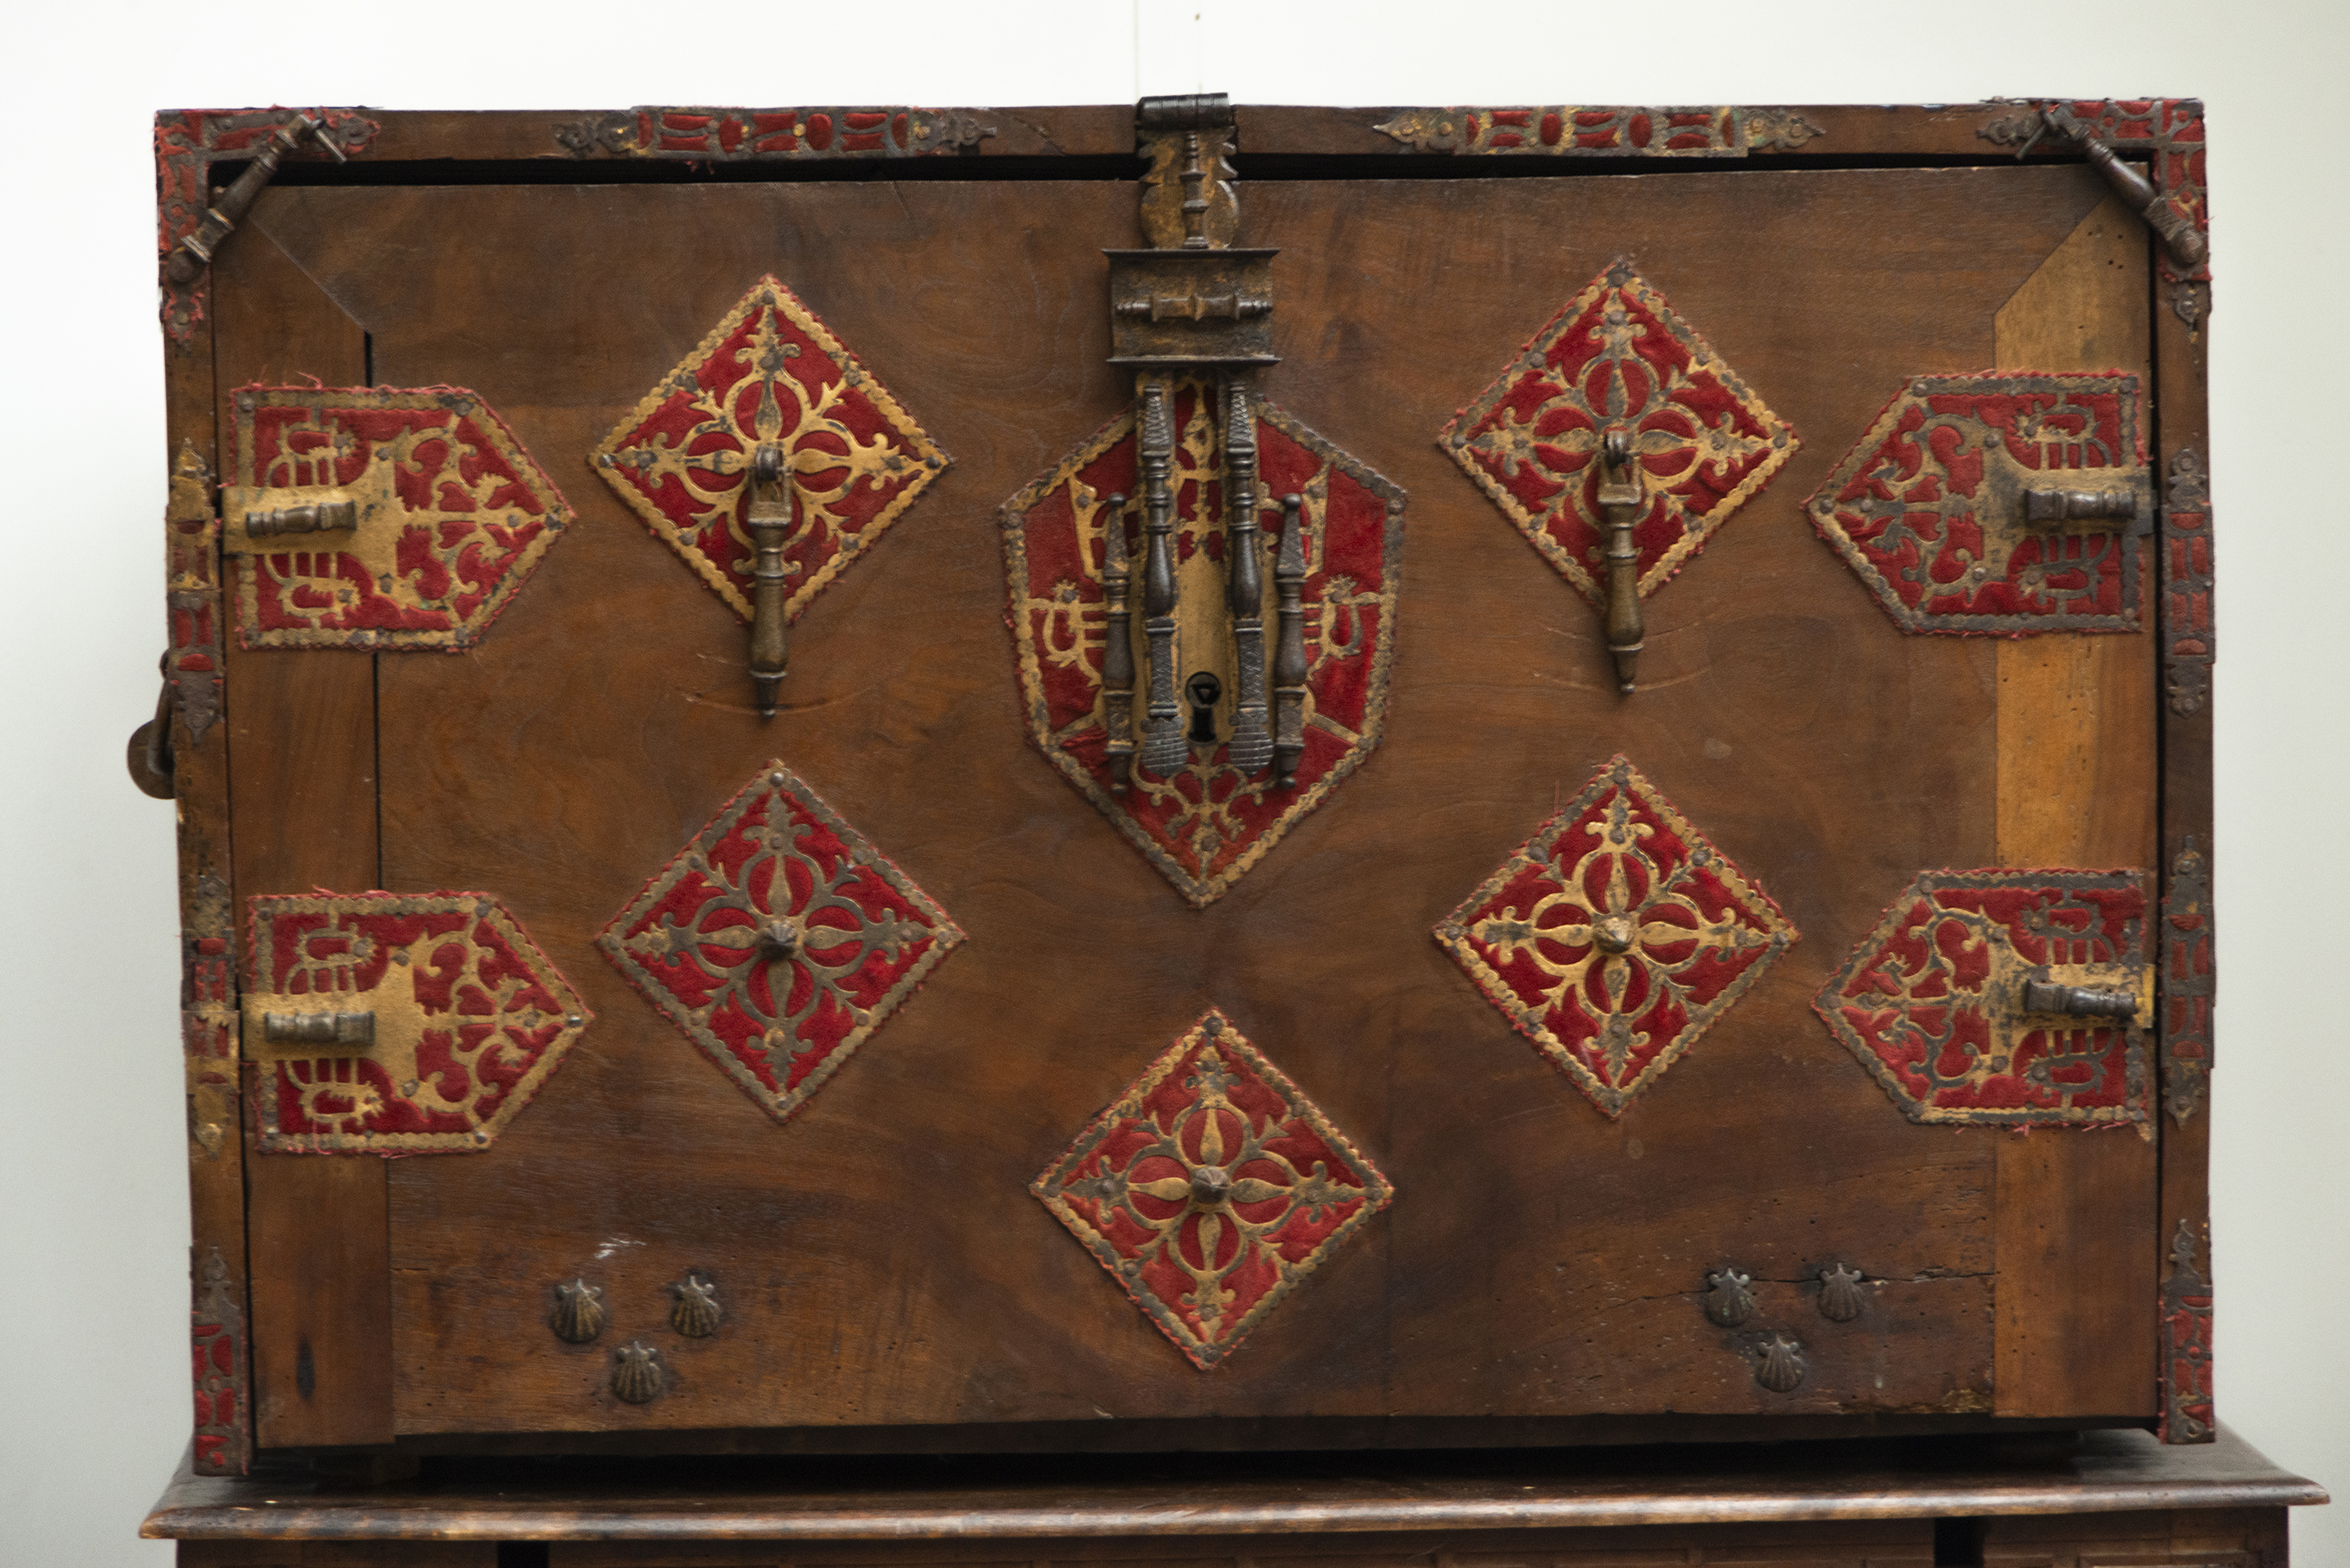 Renaissance Vargas "Bargueño" type chest cabinet with period table, 16th century - Image 2 of 8